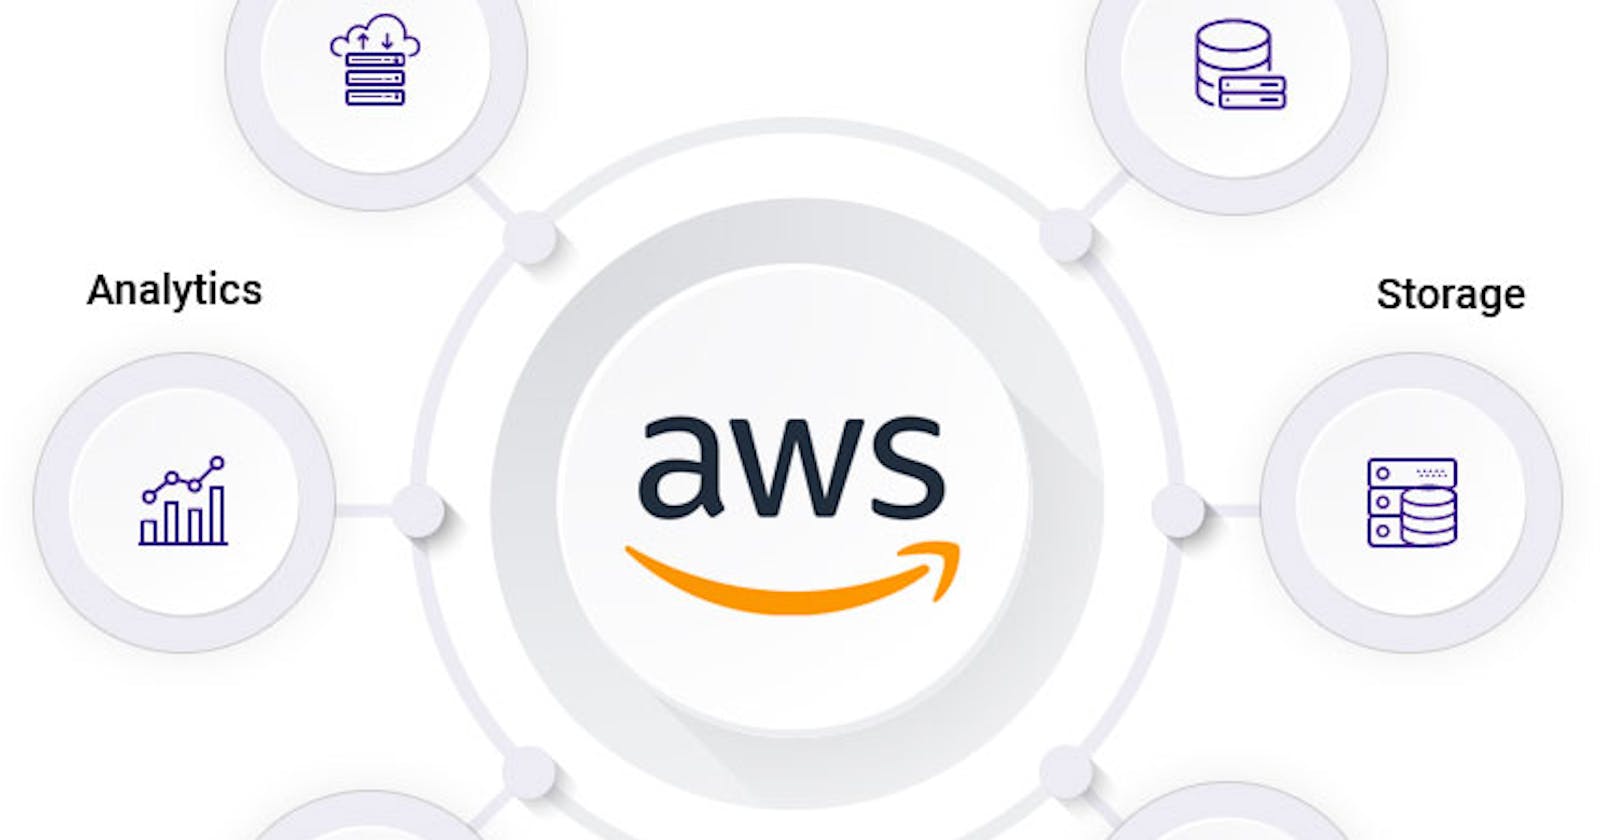 What can an individual do with Amazon Web Services (AWS)?